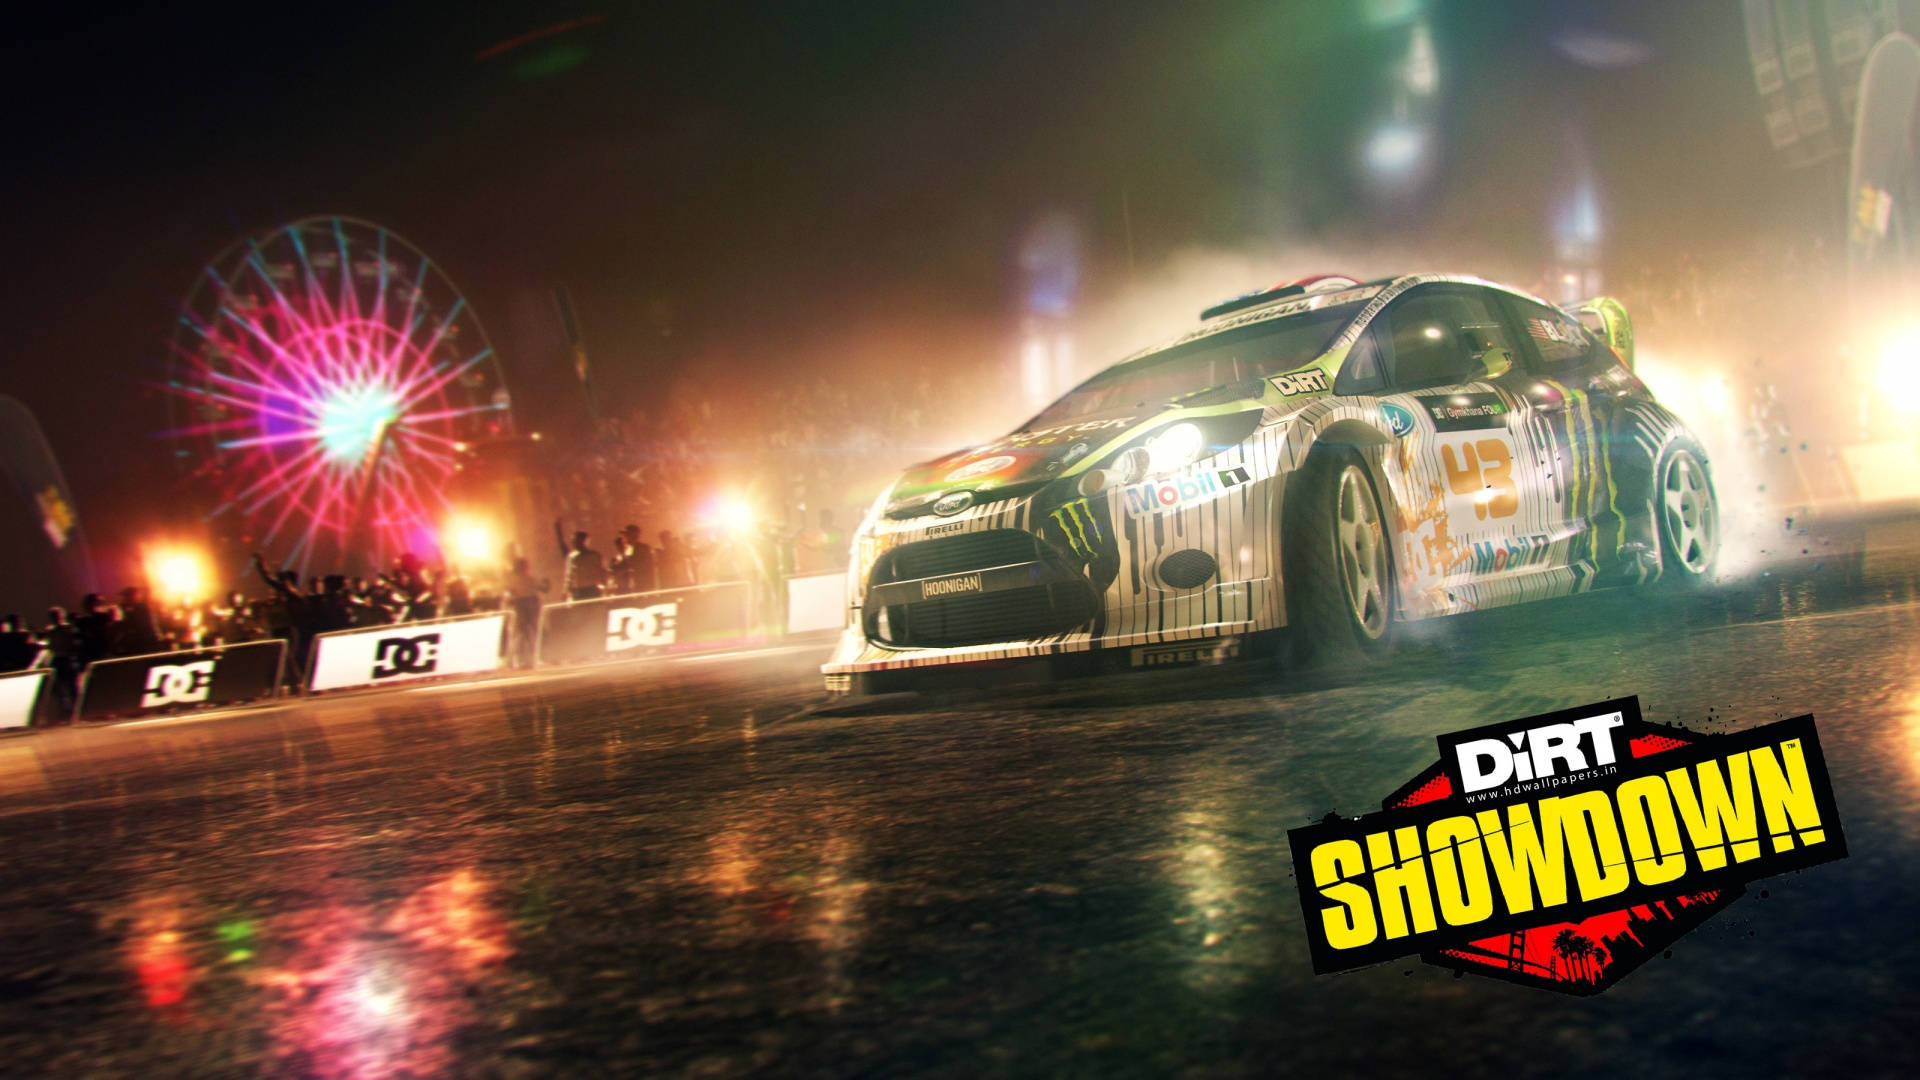 High-octane Action In Dirt Showdown Video Game Poster